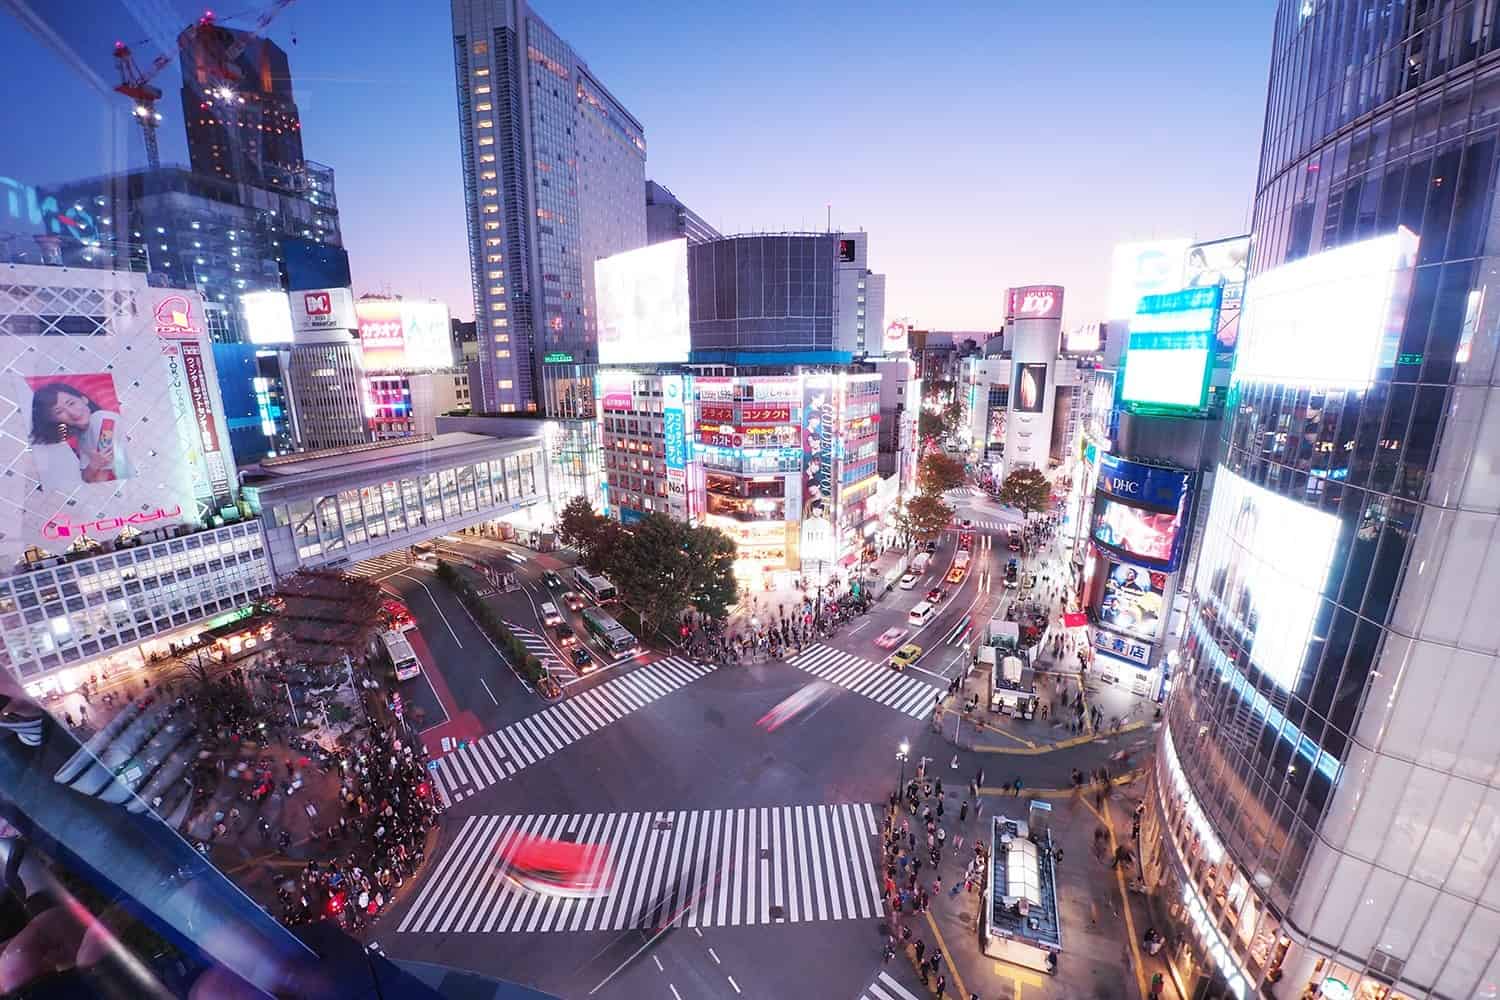 Tokyo Photography Locations - A Photographer's Guide to Photo Spots in Tokyo